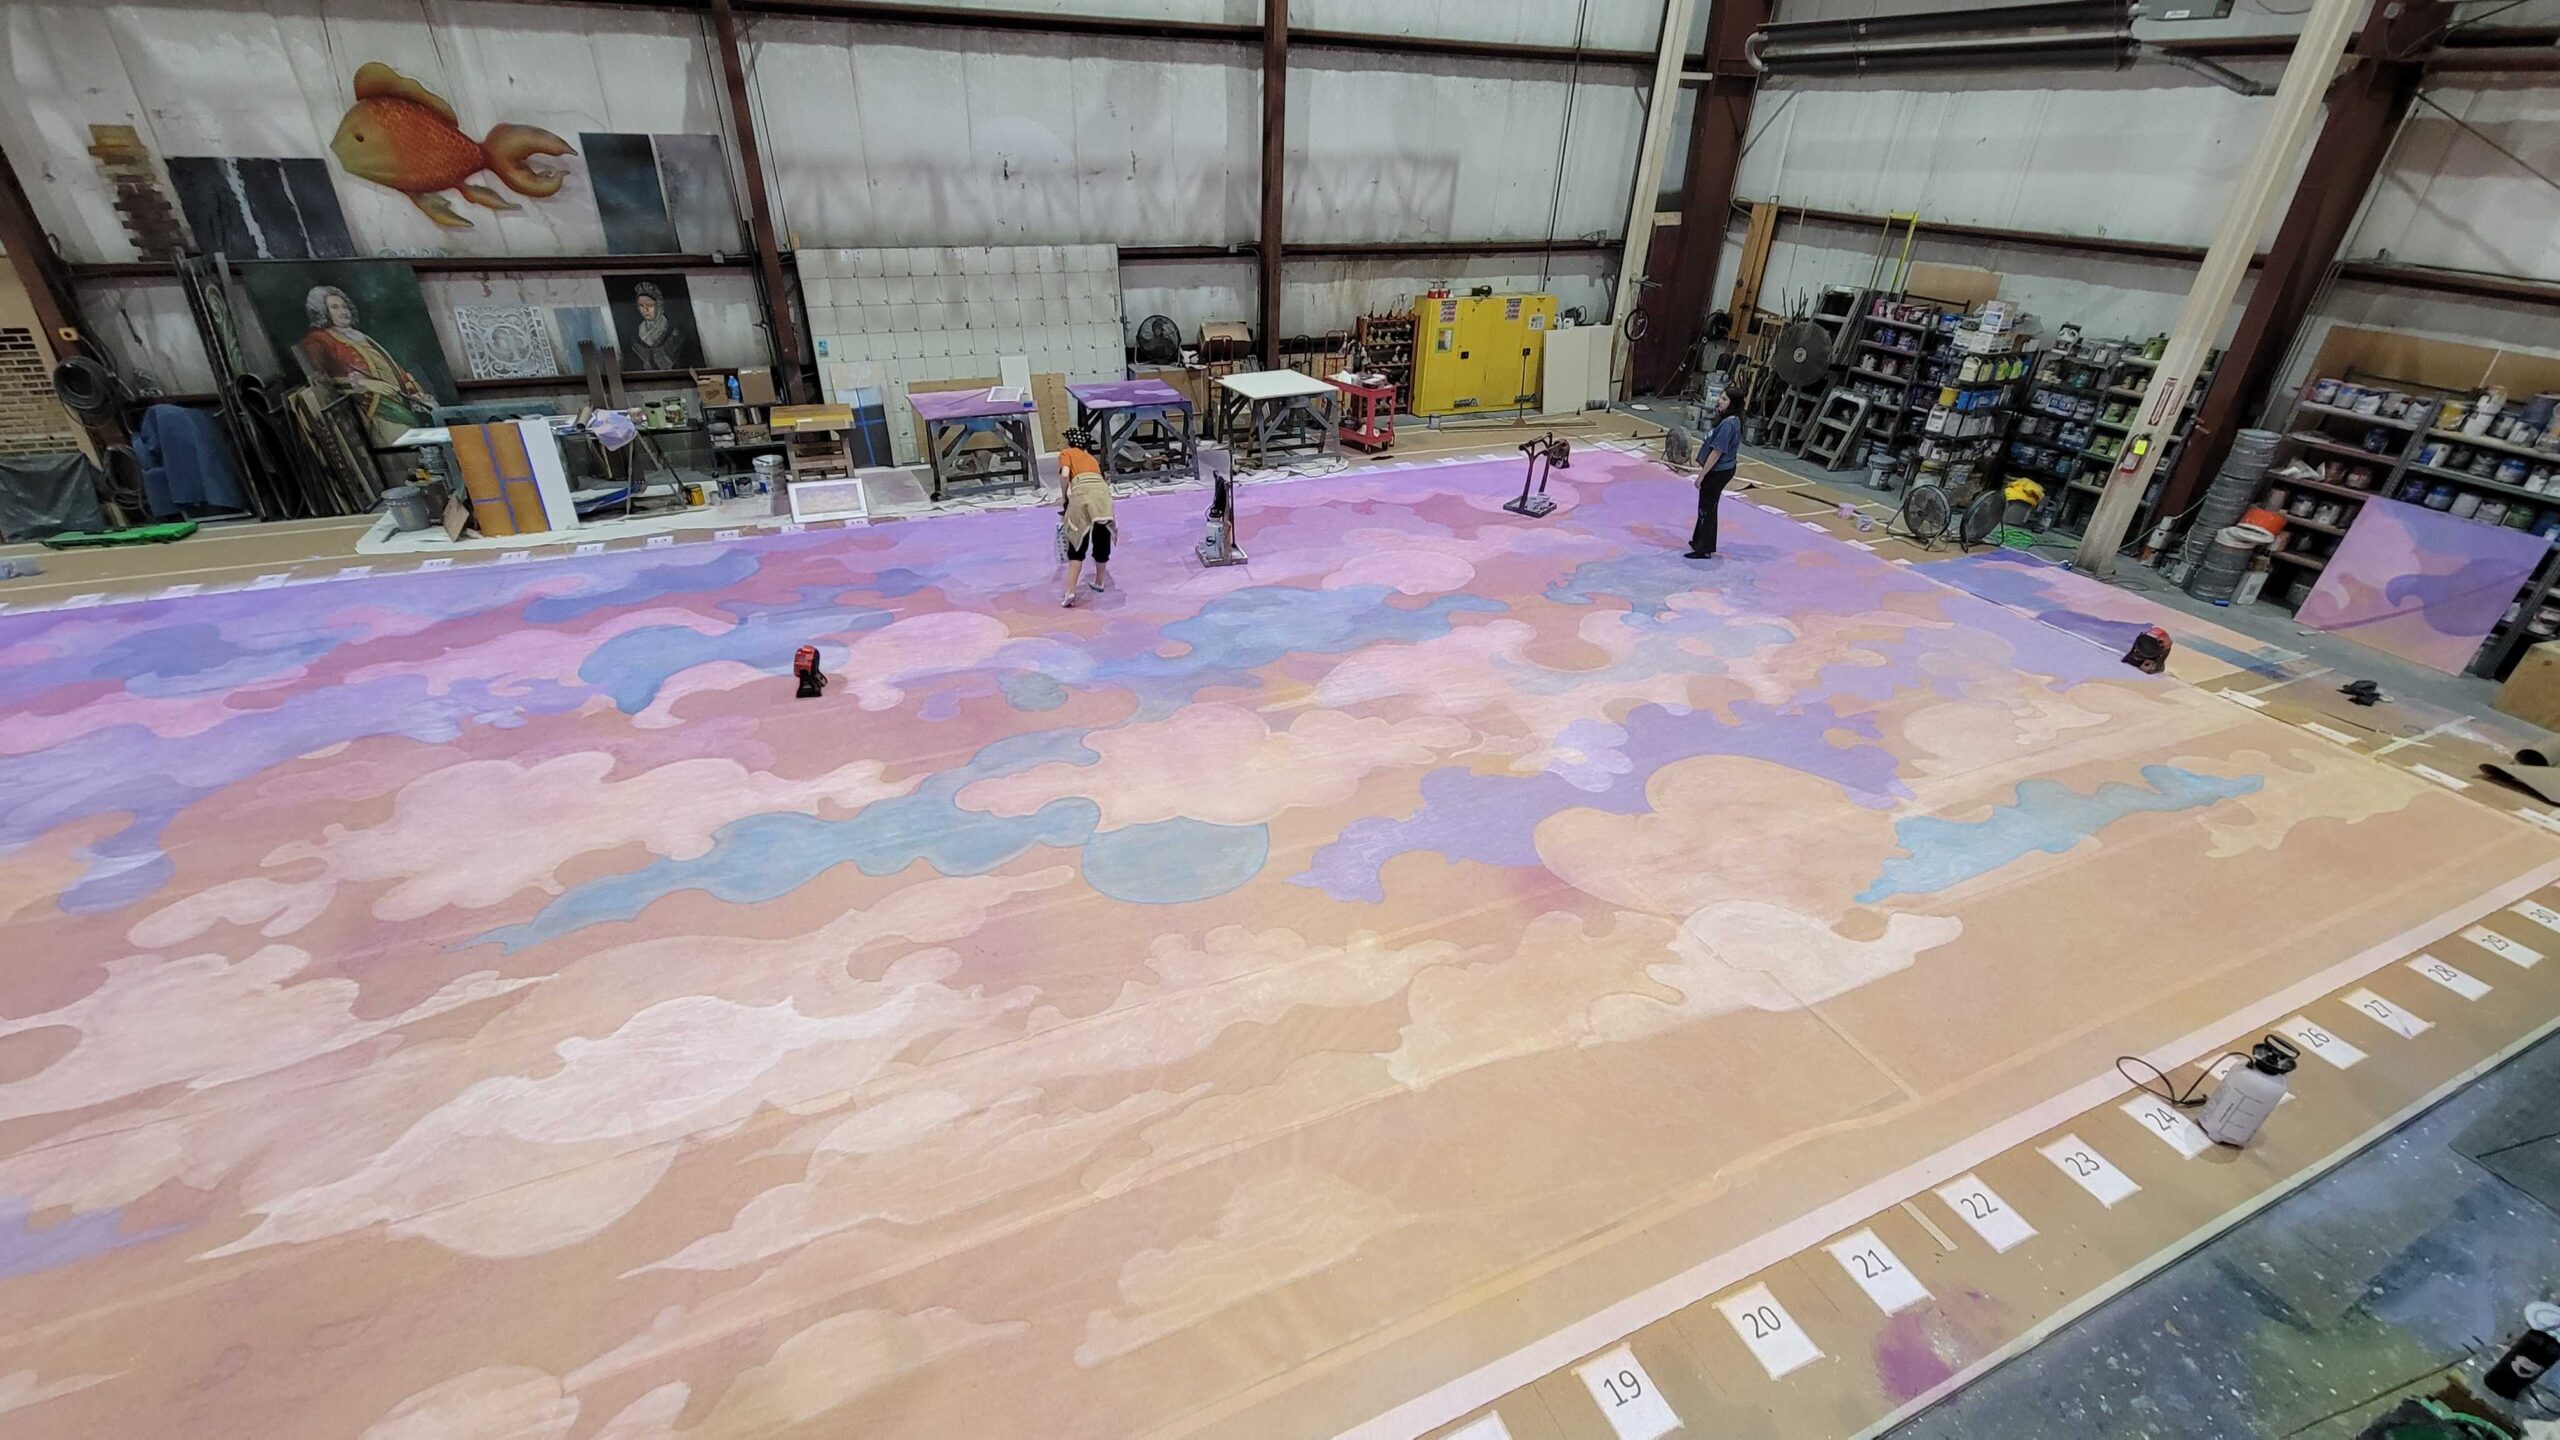 Backstage, stagehands and artists work on painting a massive cloudscape backdrop.